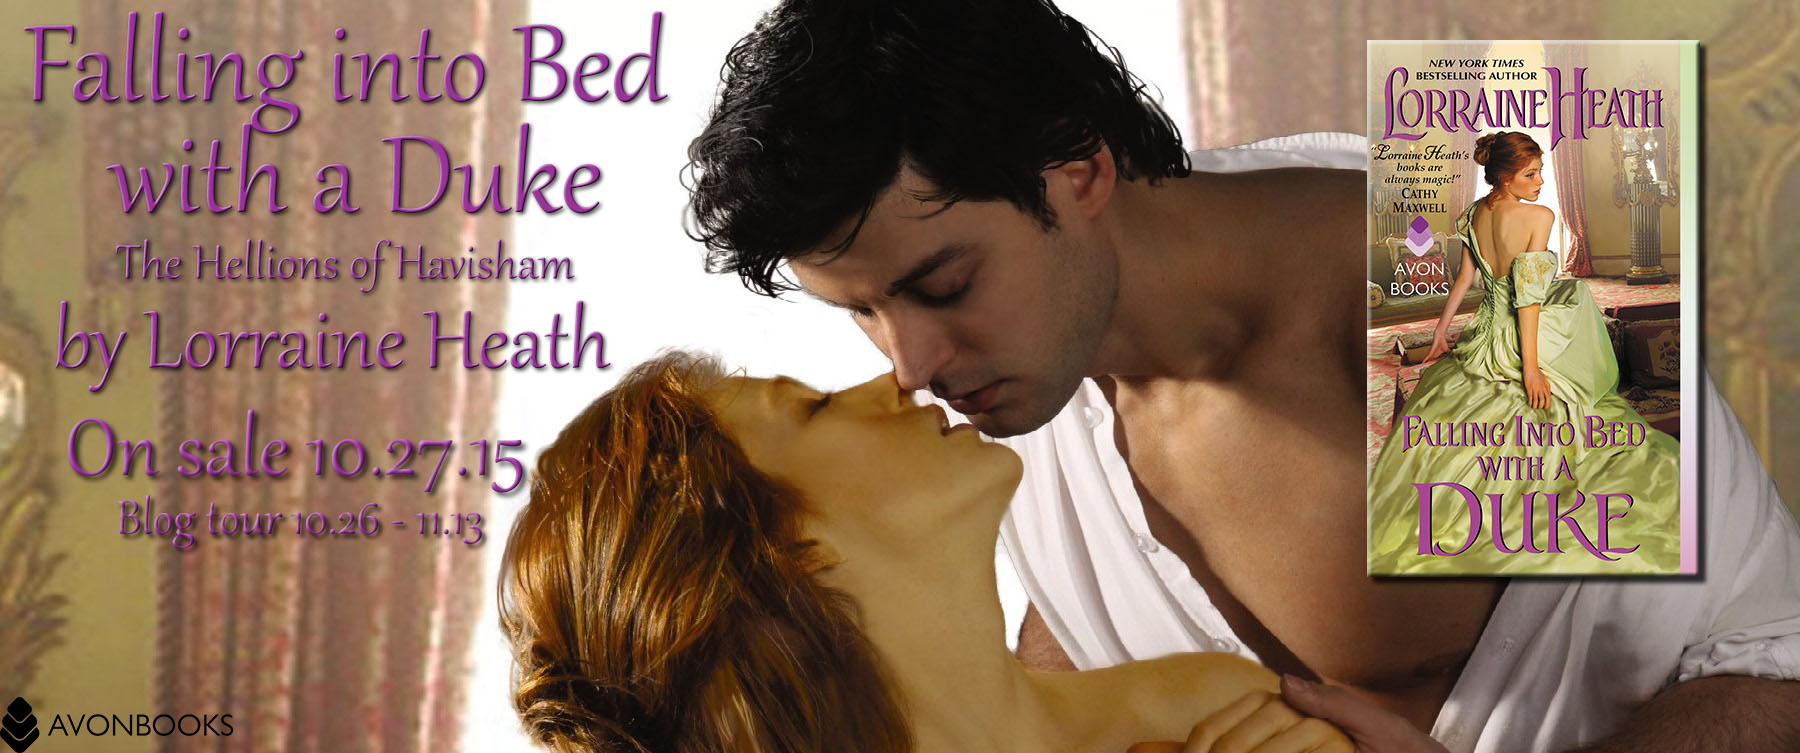 falling into bed with a duke